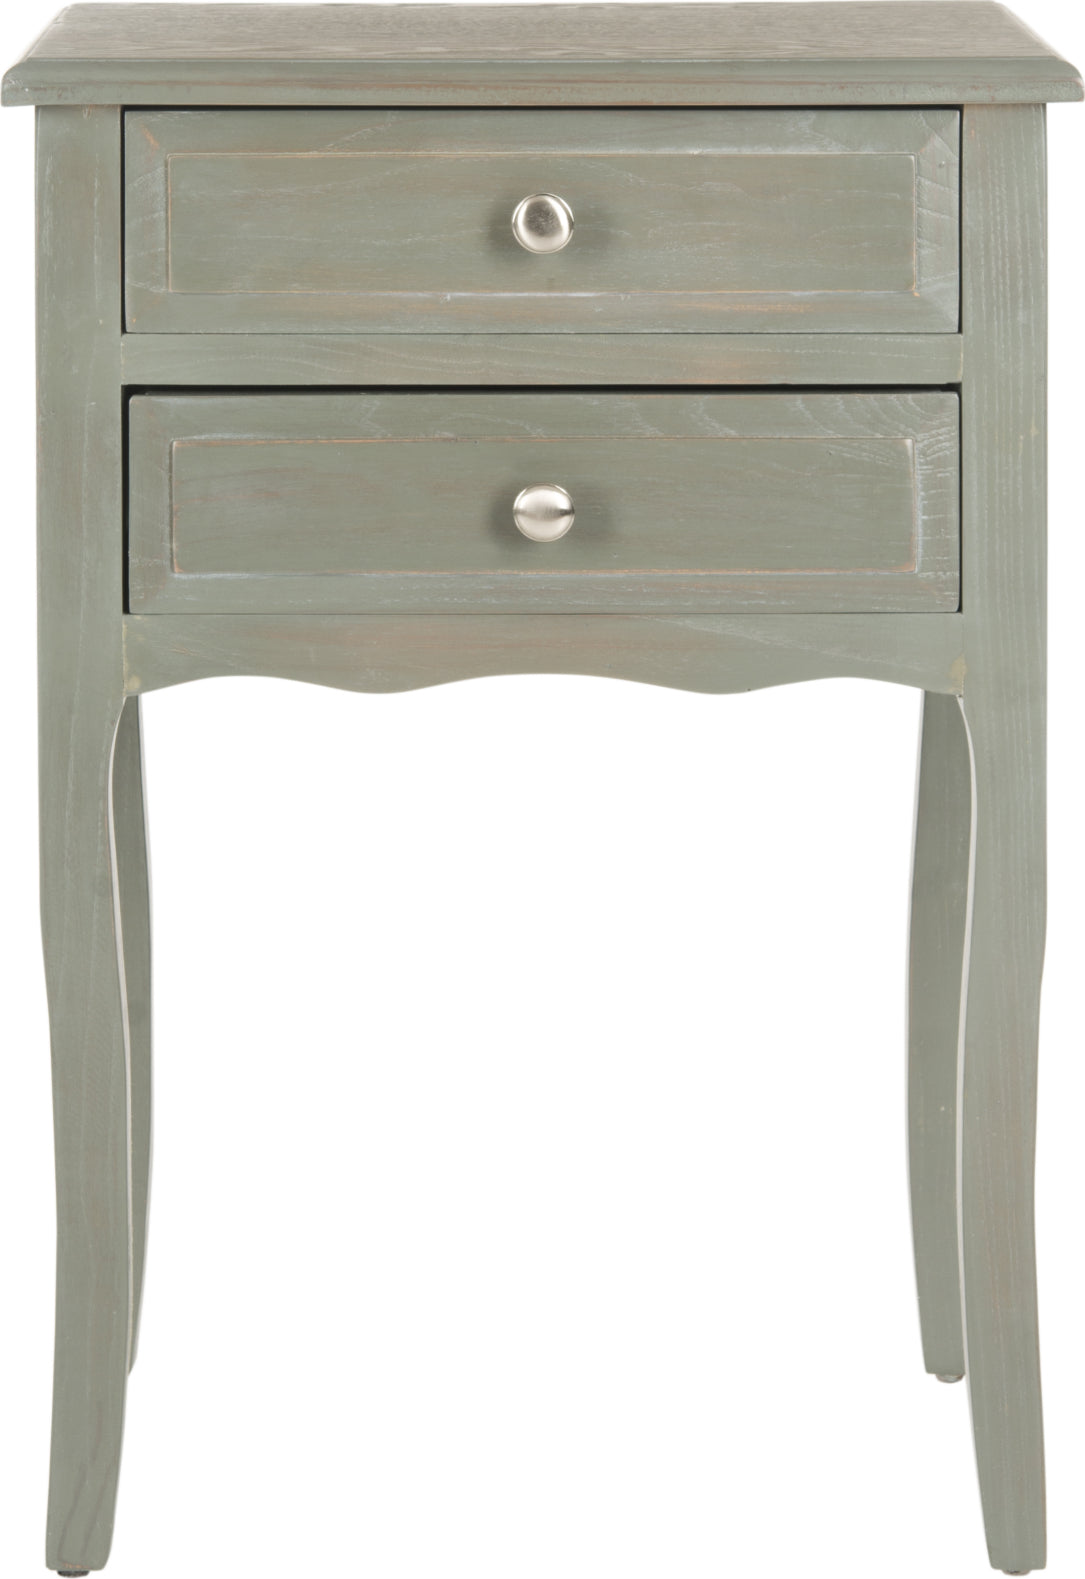 Safavieh Lori End Table With Storage Drawers French Grey Furniture main image